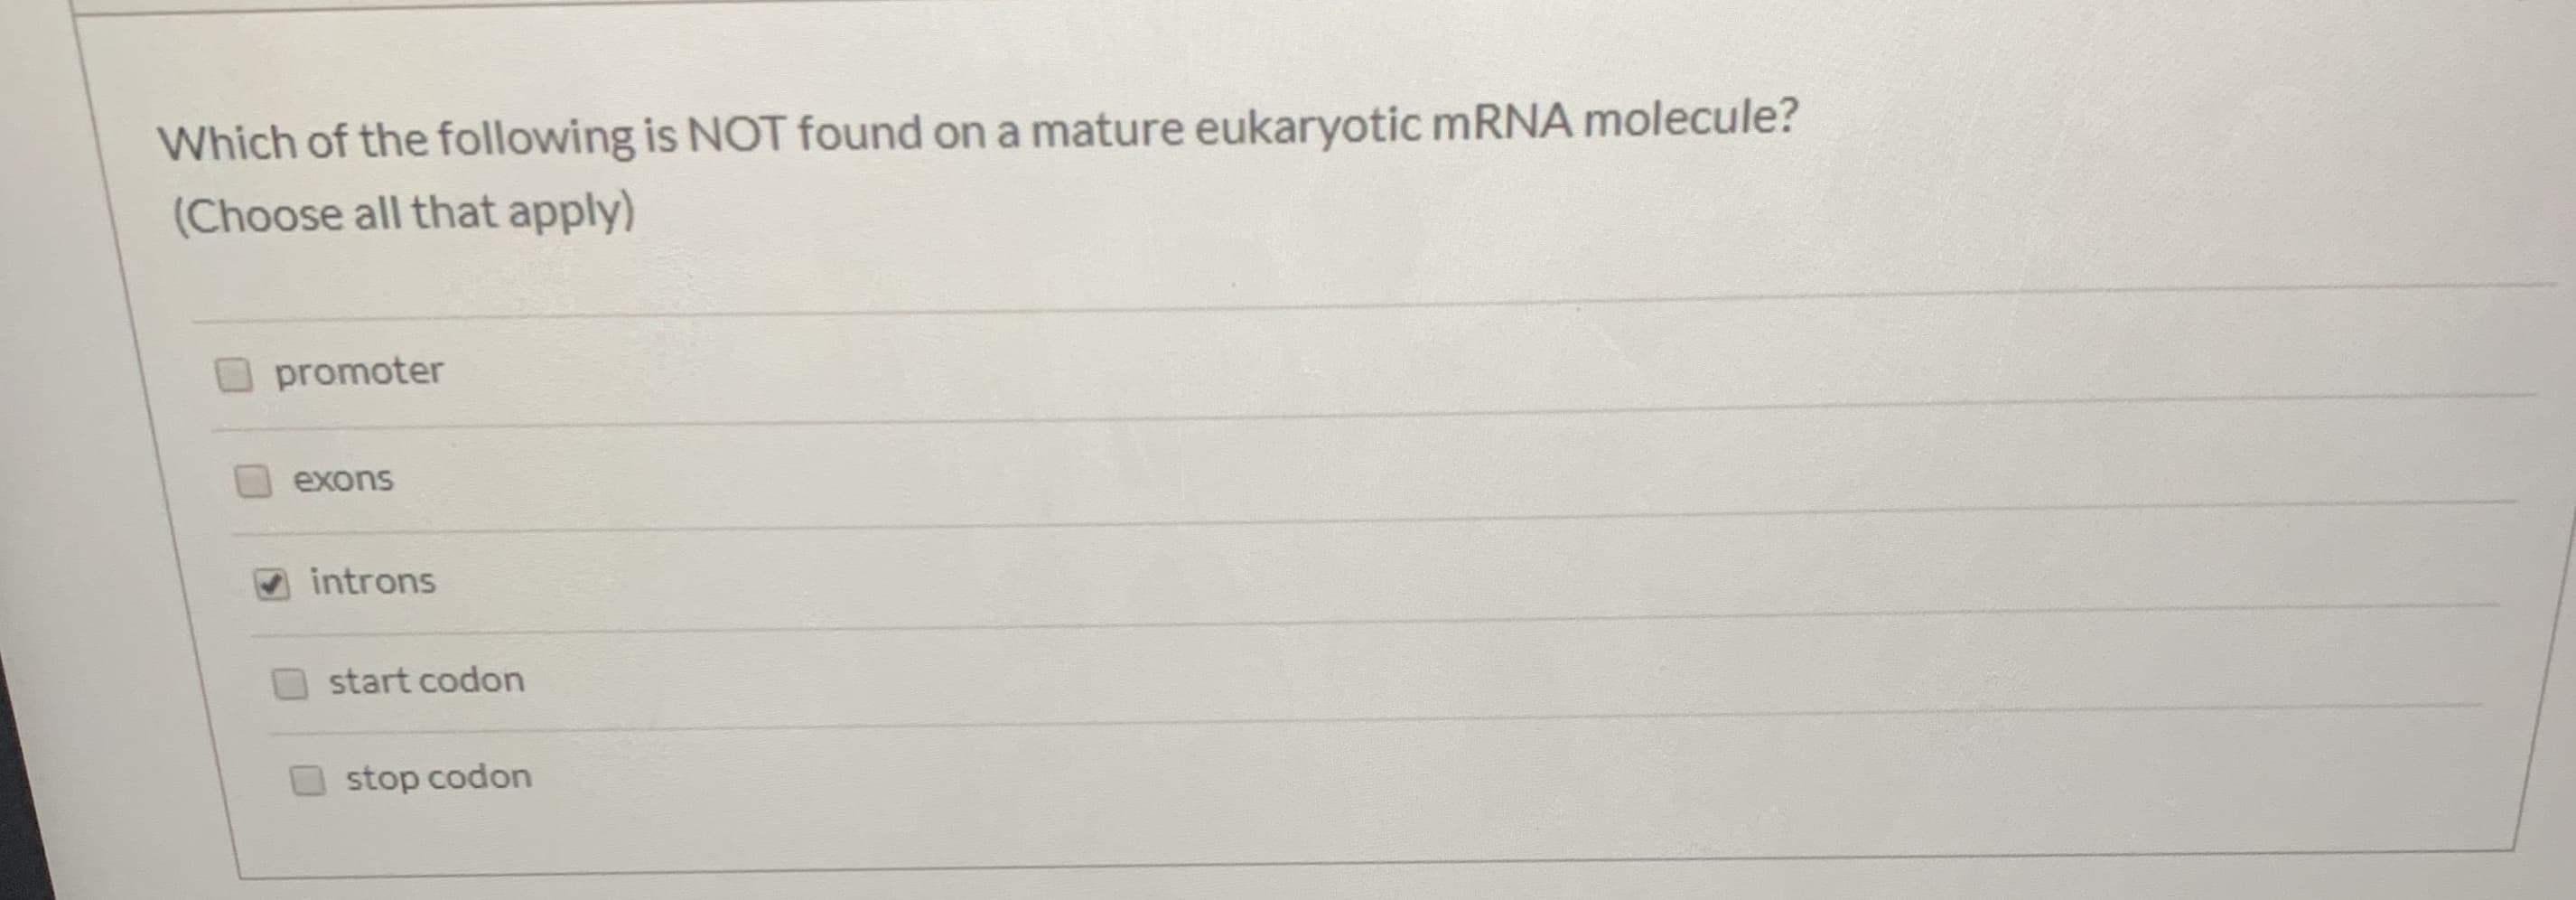 Which of the following is NOT found on a mature eukaryotic mRNA molecule?
(Choose all that apply)
promoter
exons
introns
start codon
stop codon
